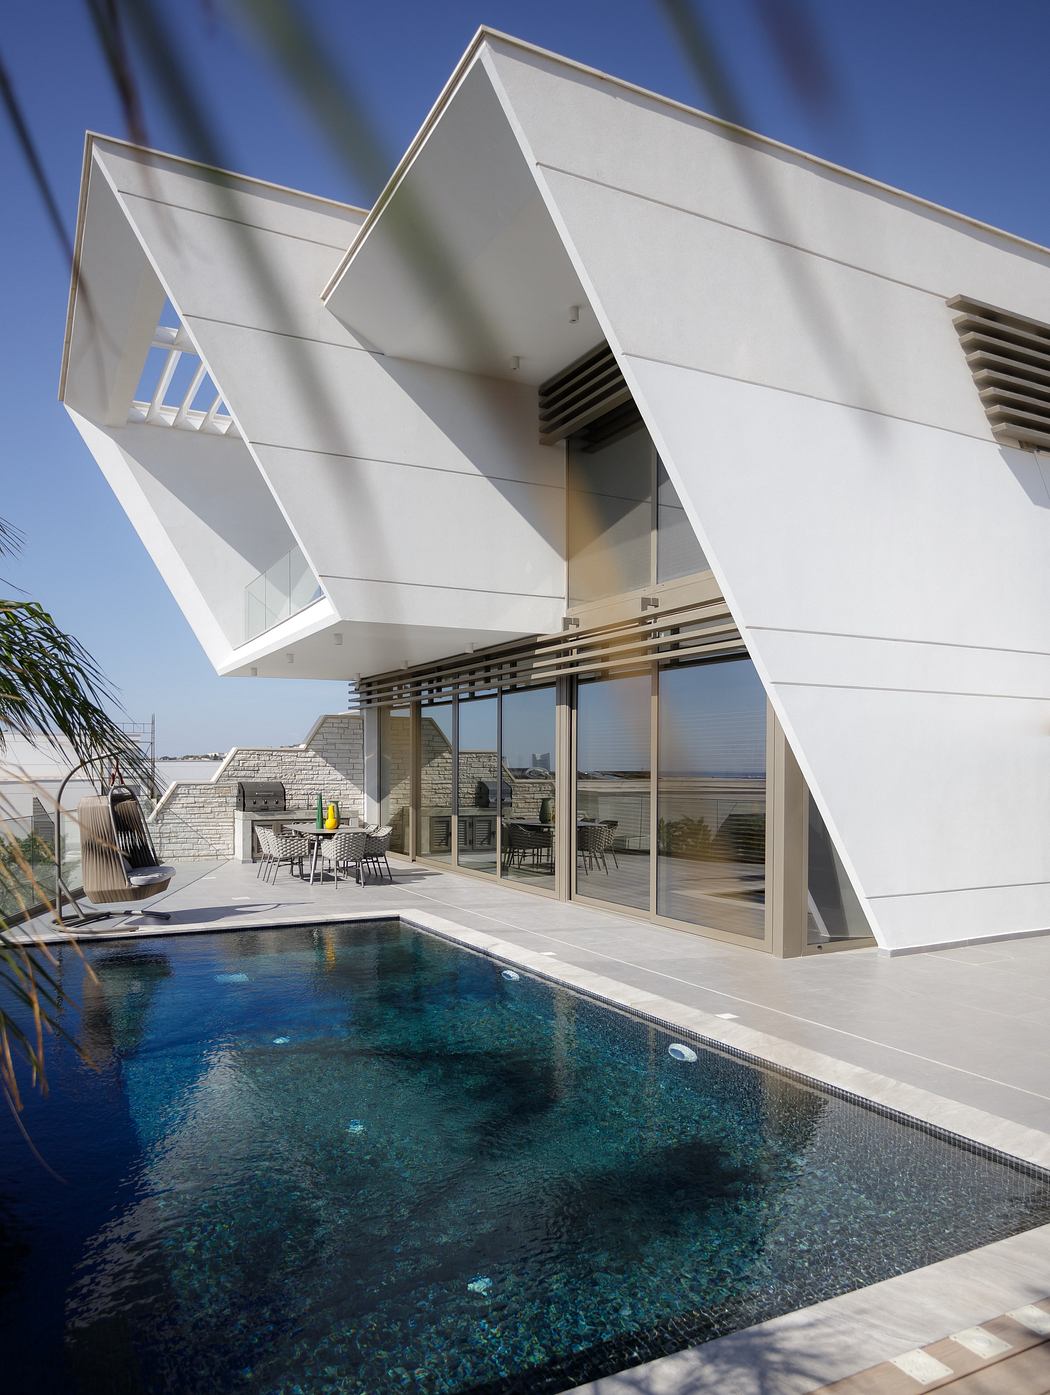 Modern geometric architecture with sleek glass walls, pool, and outdoor seating area.